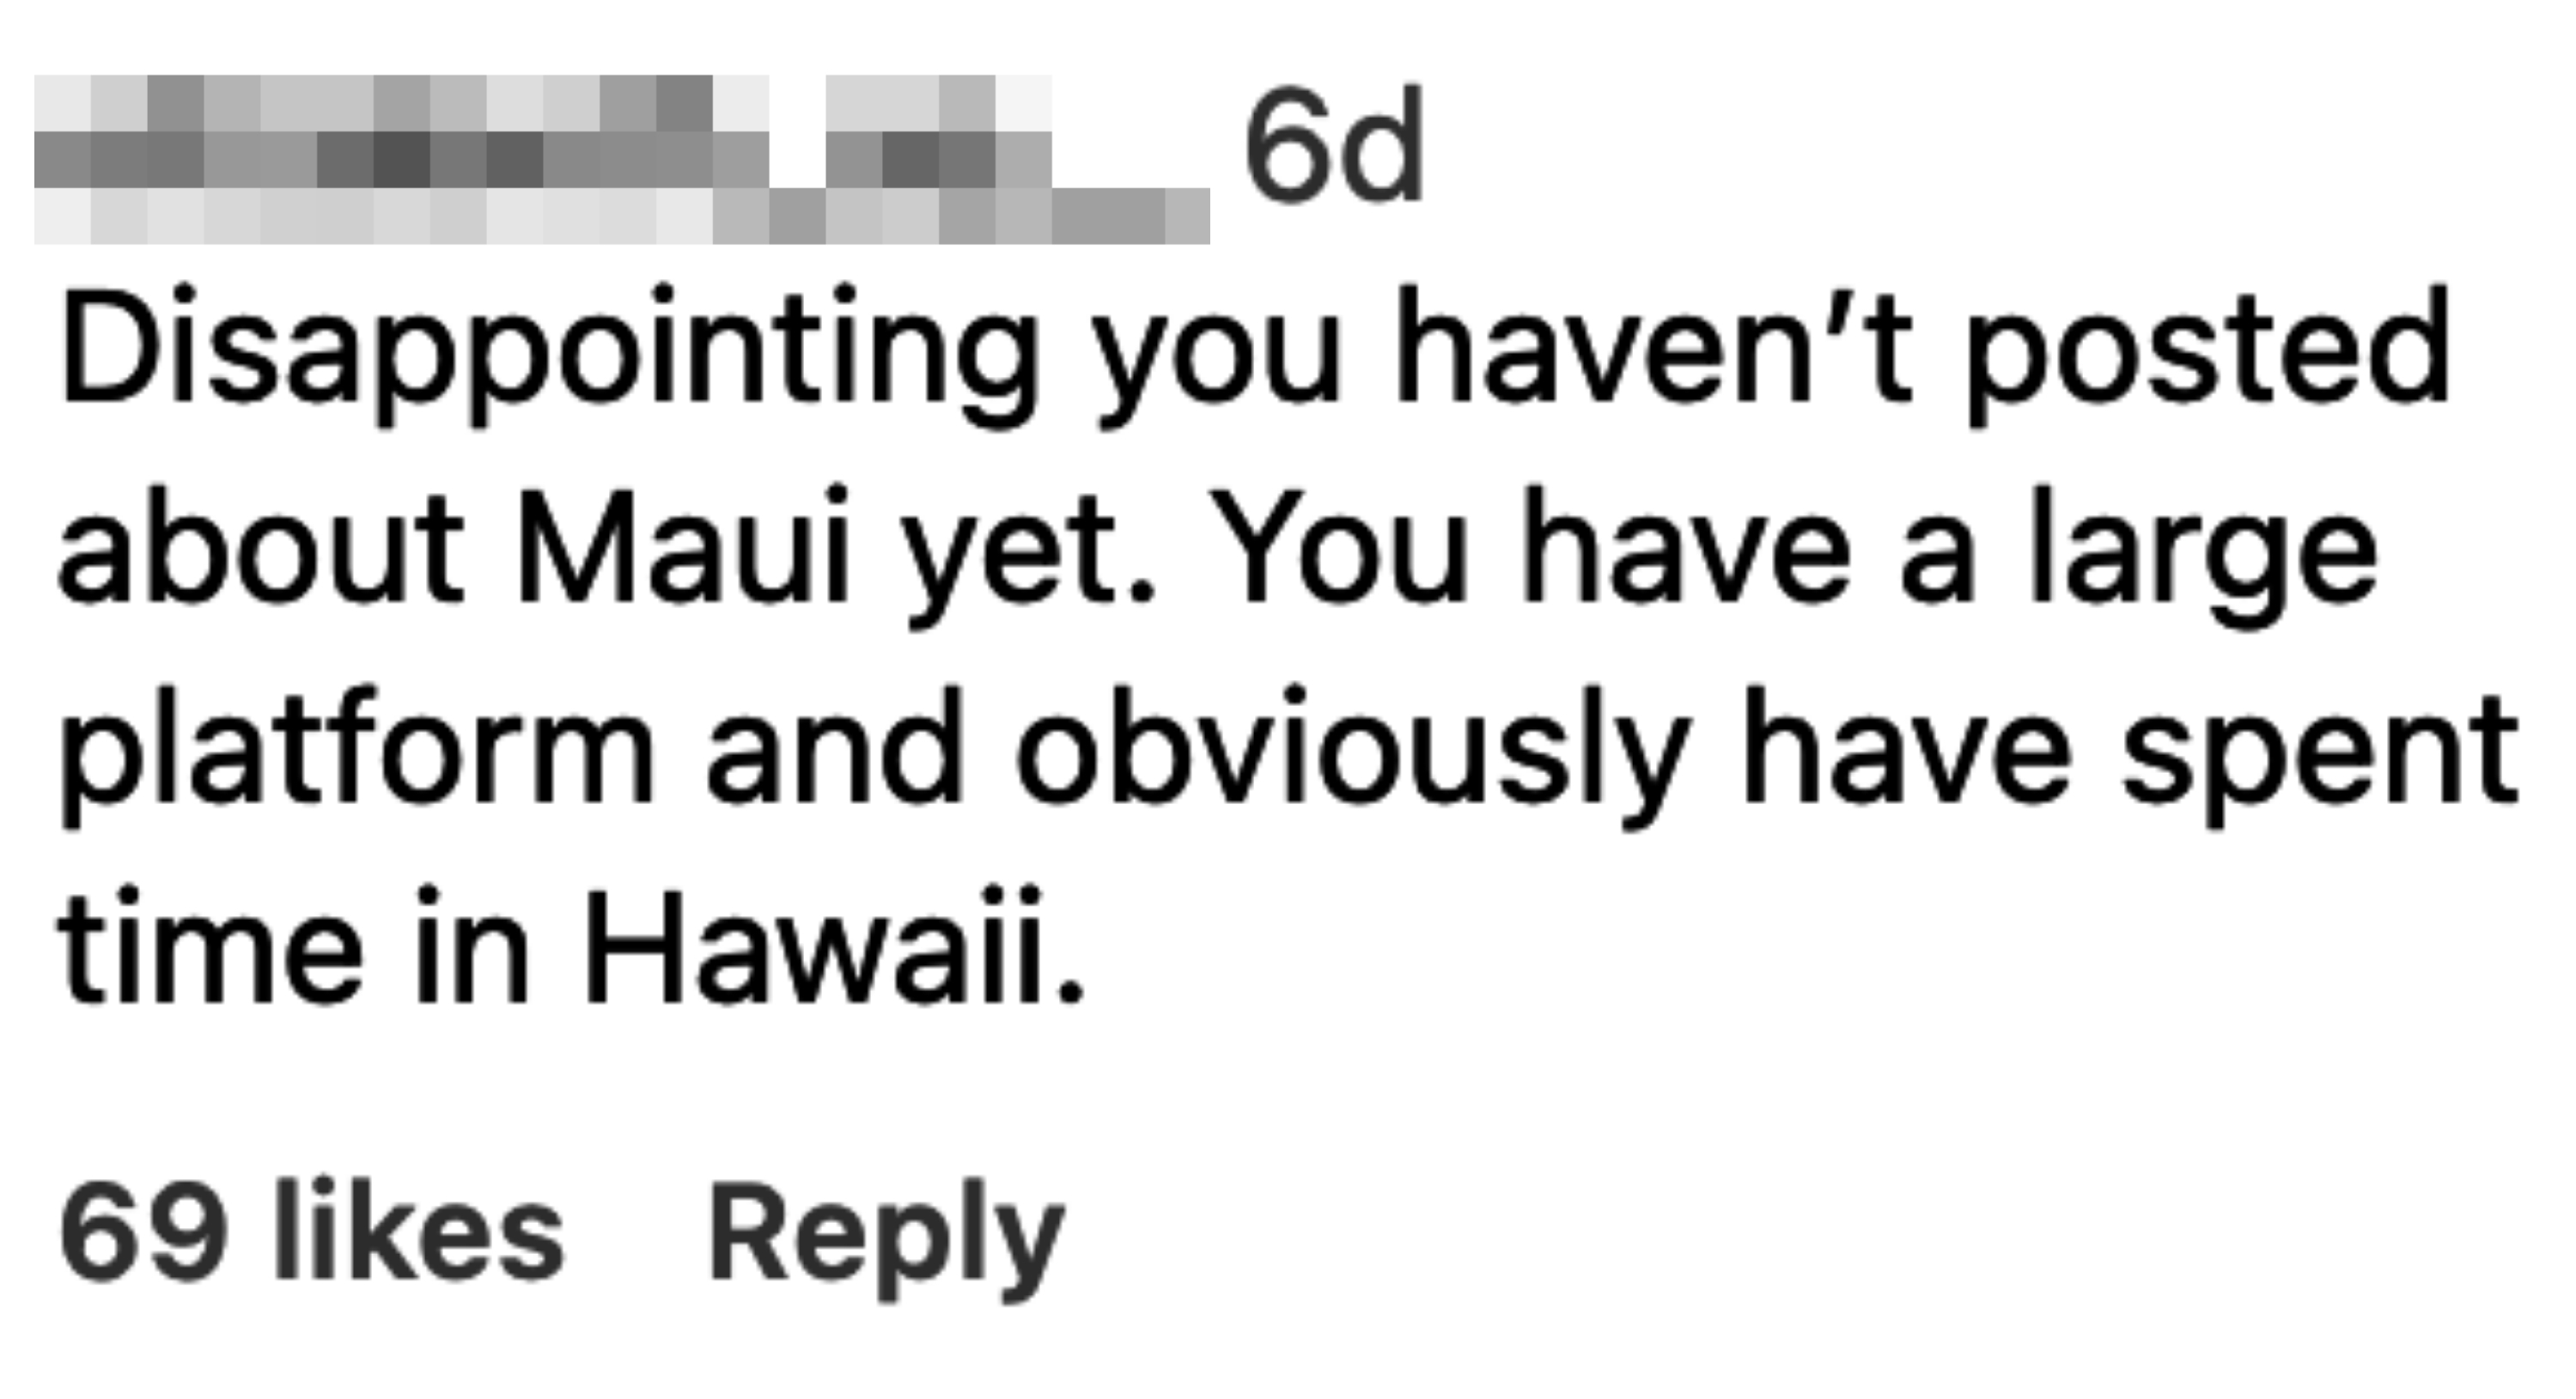 &quot;Disappointing you haven&#x27;t posted about Maui yet; you have a large platform and obviously have spent time in Hawaii&quot;